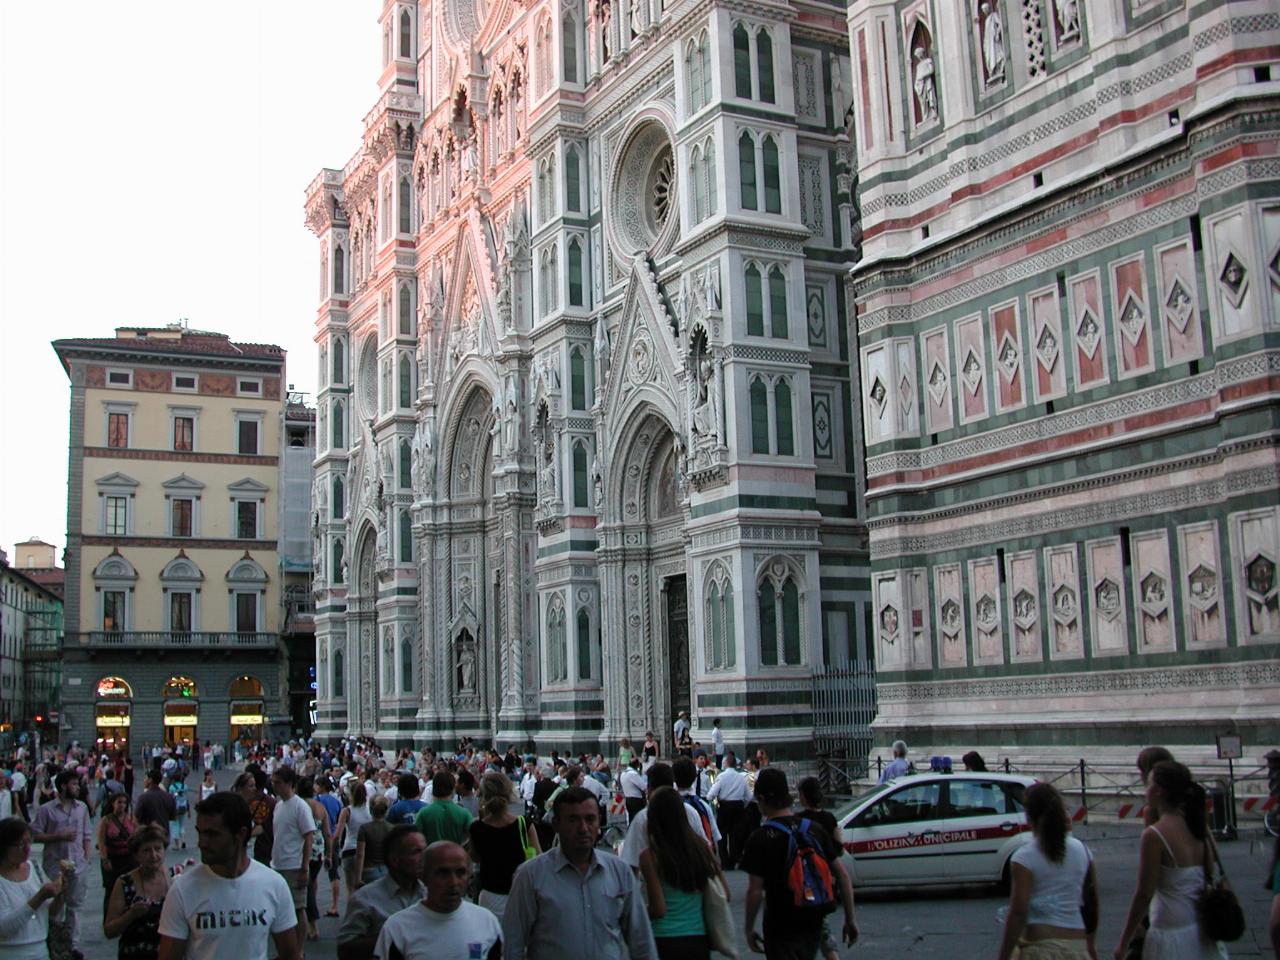 Front of Duomo, with band forming up (not really obvious)